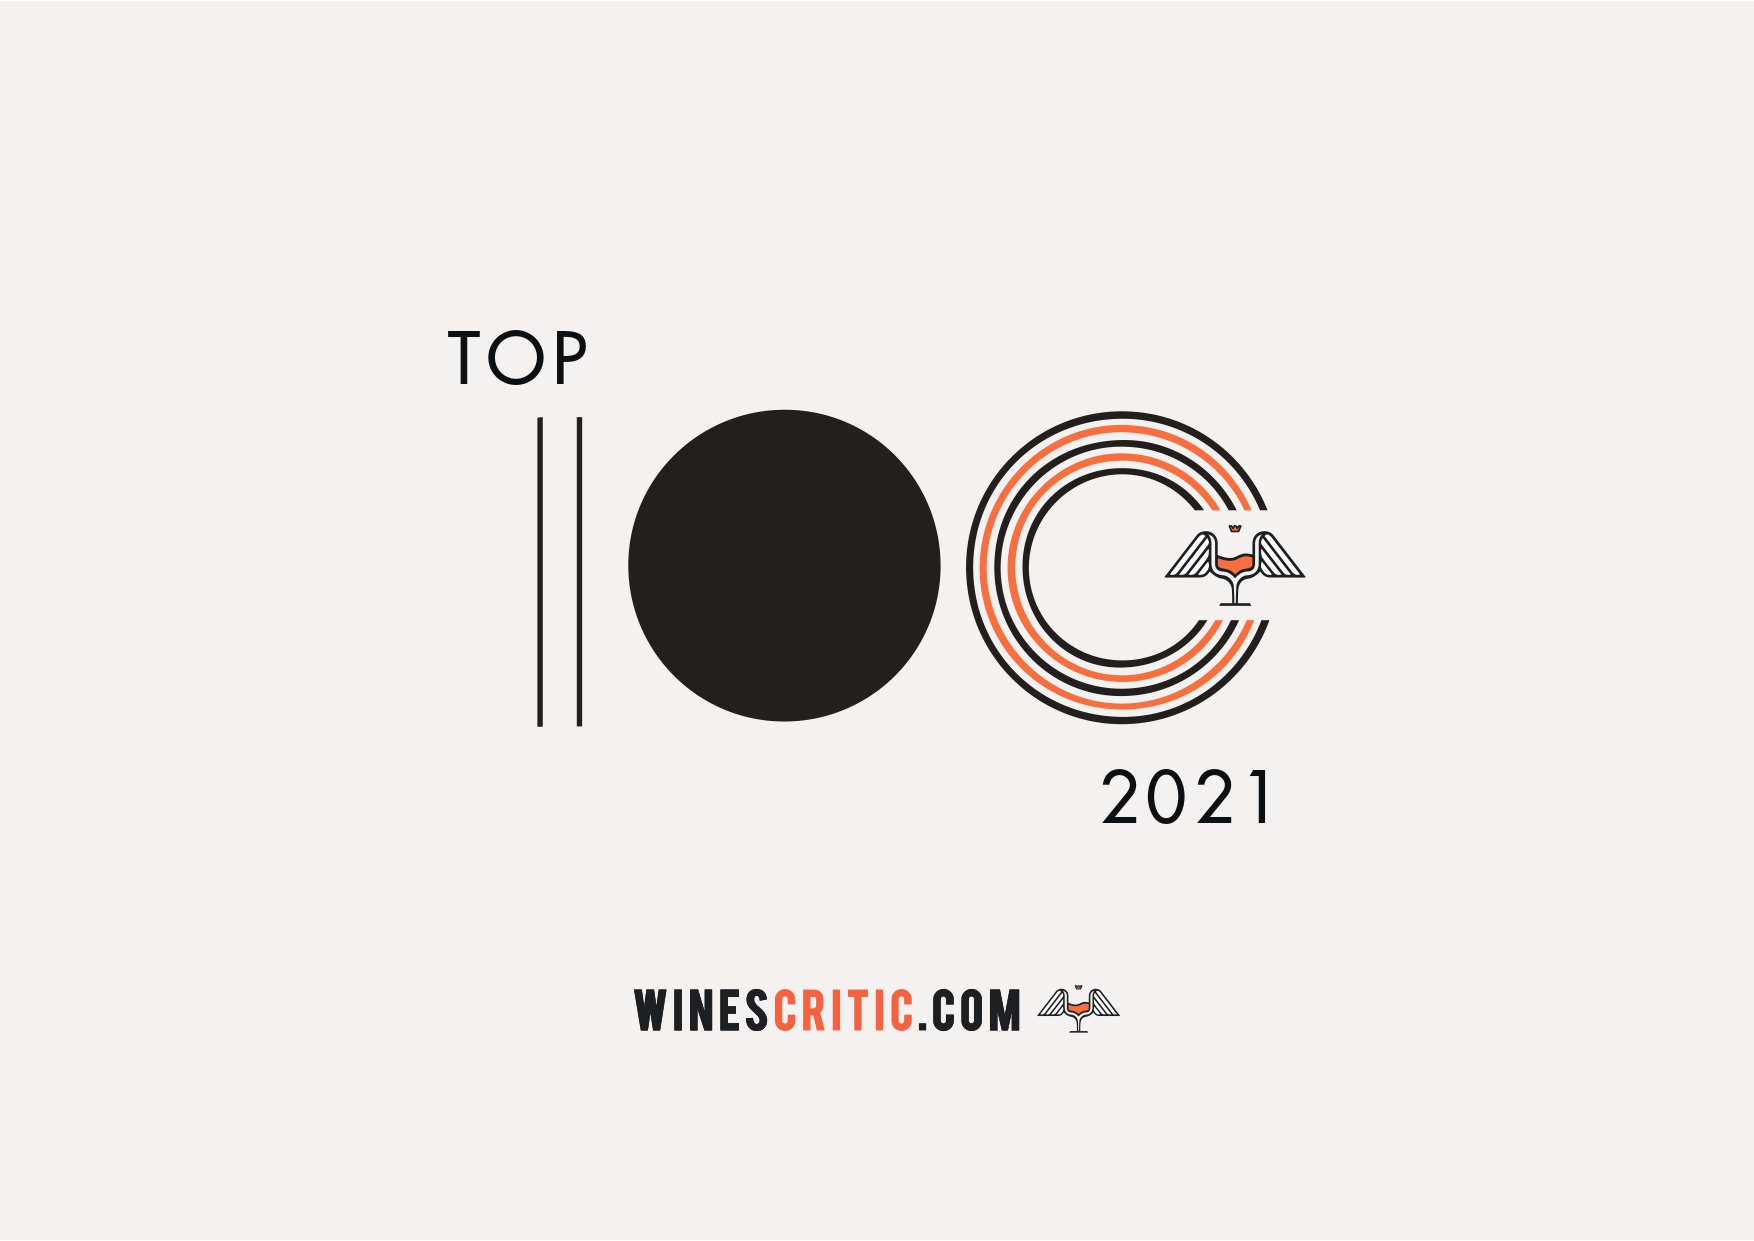 The Great Beauty 2022, The Virtual Tour of Italian Wines April 2022 Edition  - WinesCritic